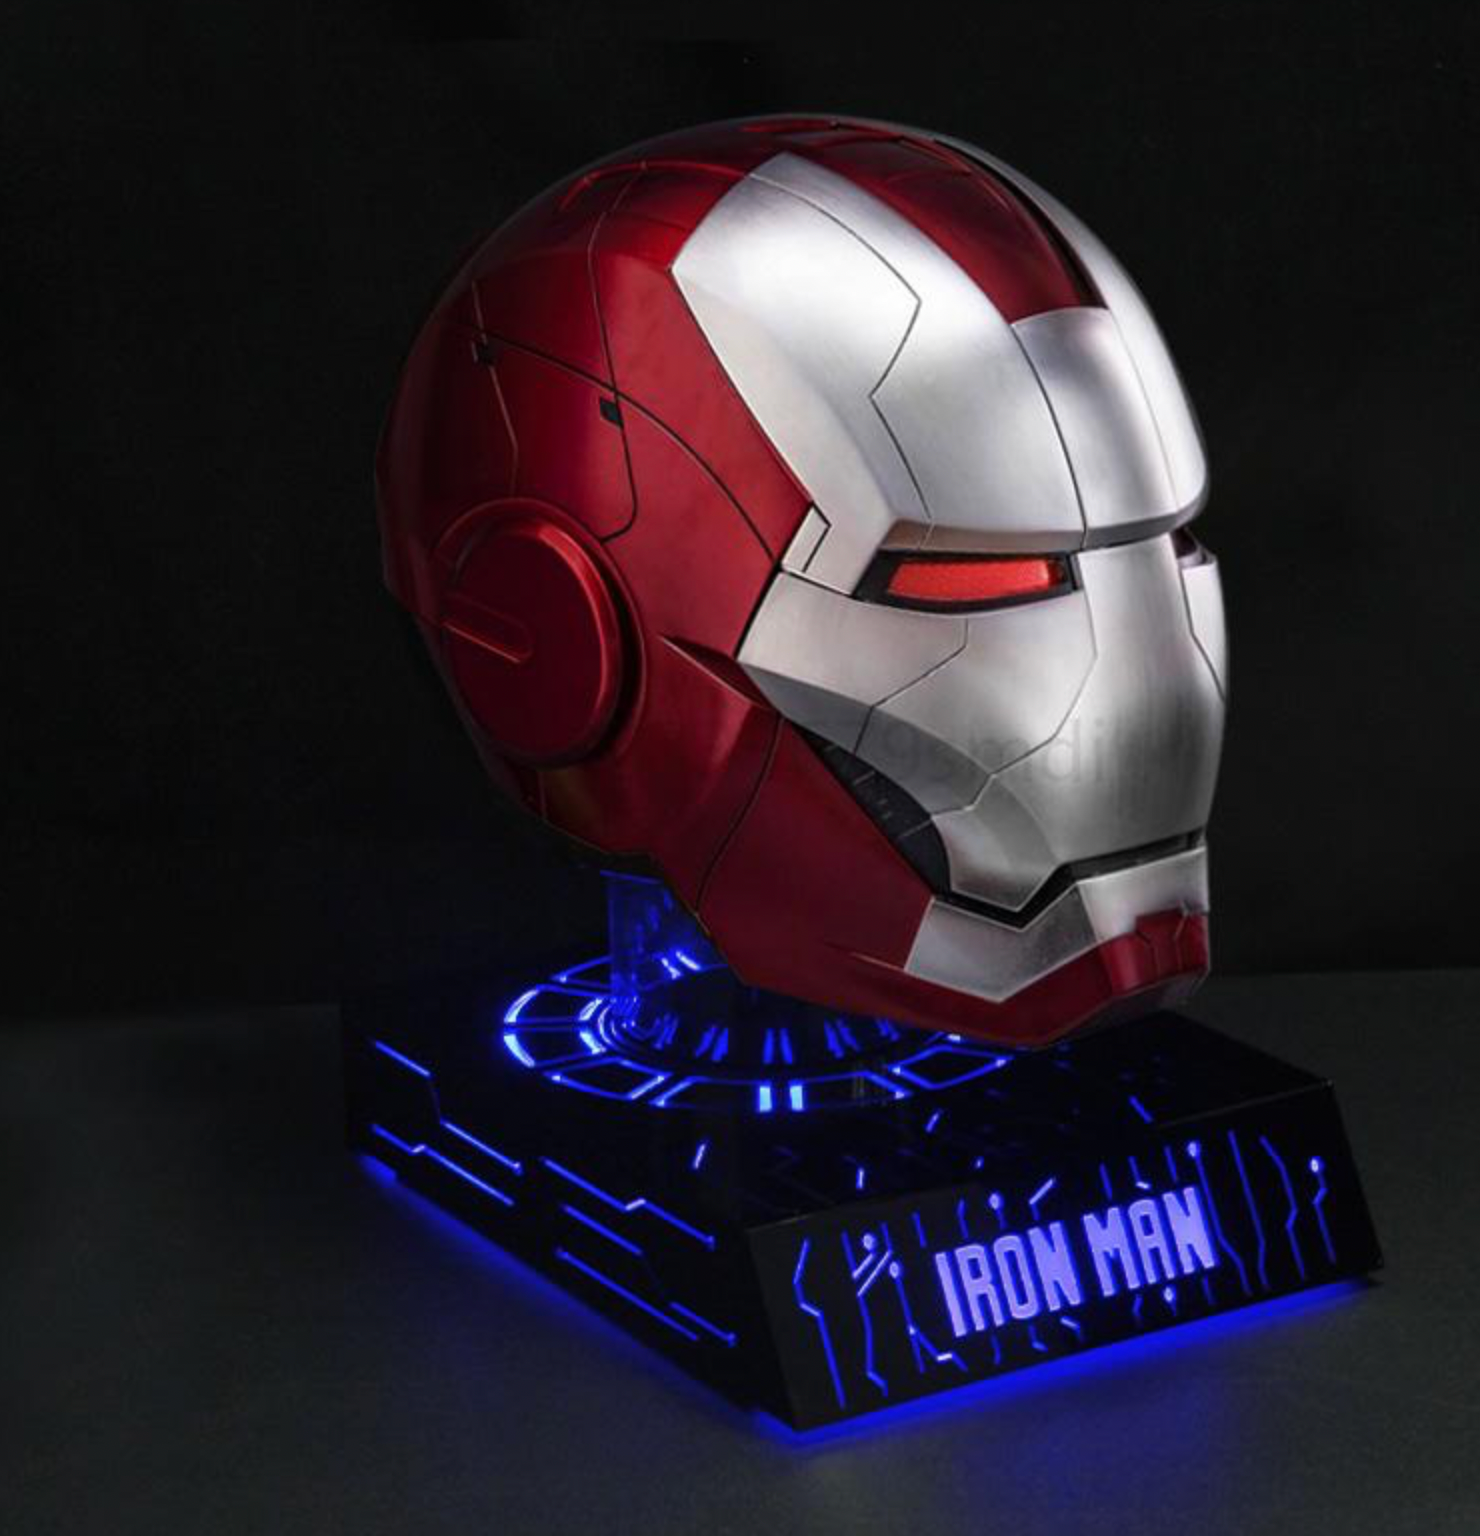 Iron man mk5 electric helmet with voice activation and opening features,